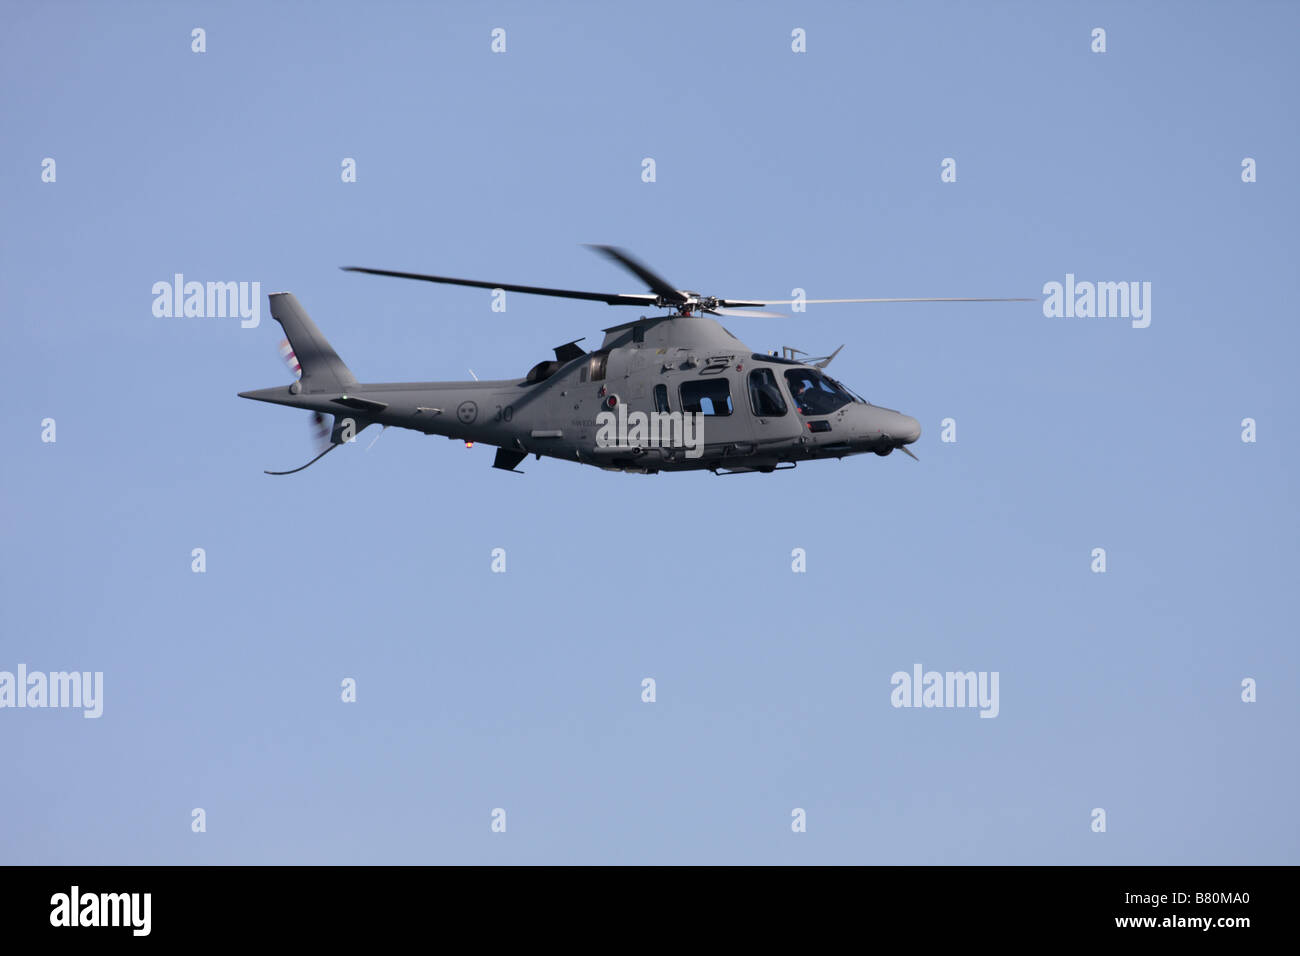 AgustaWestland AW109 helicopter Stock Photo